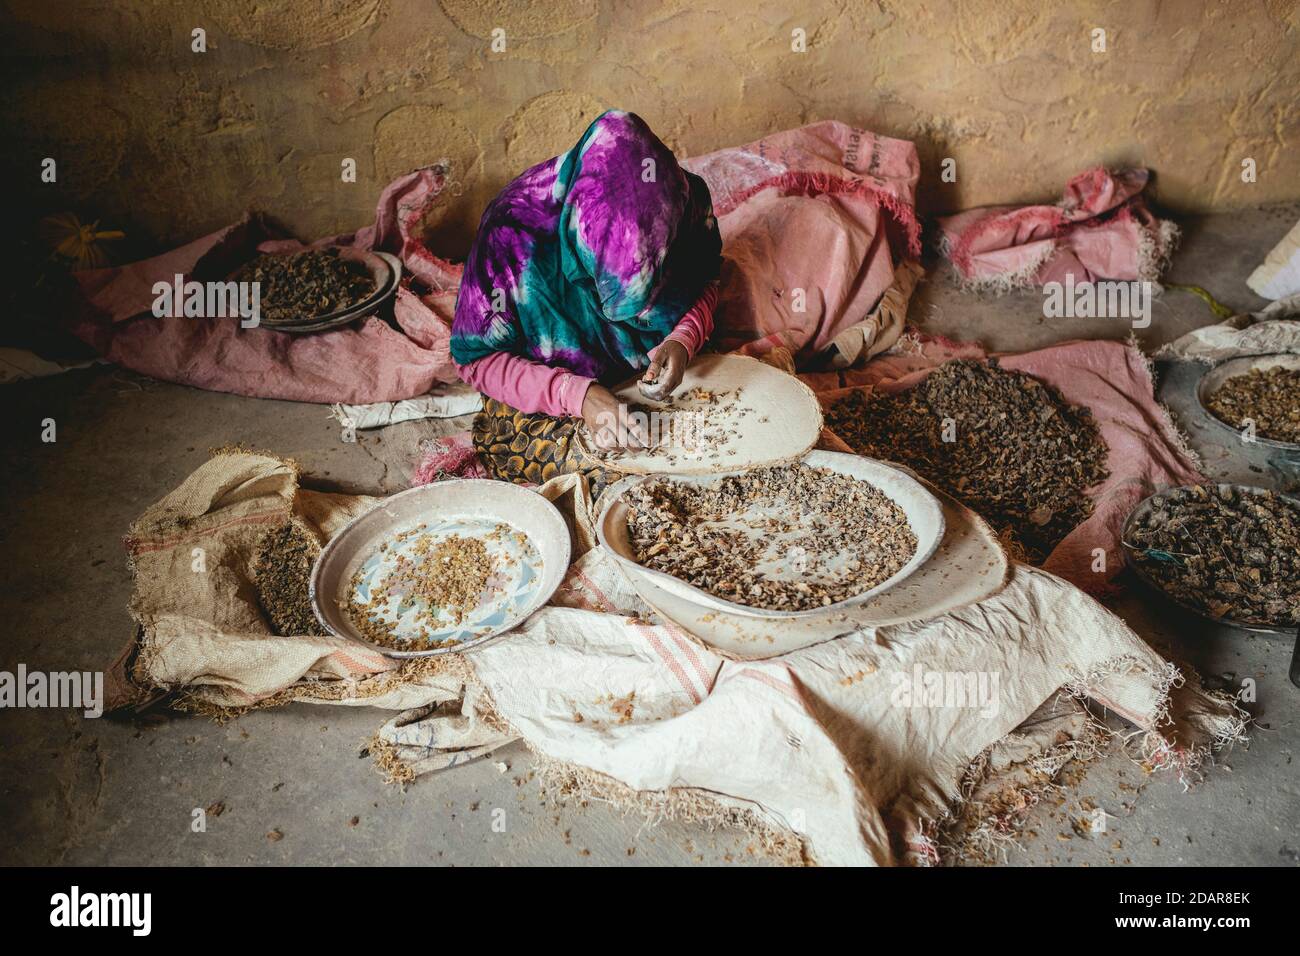 Frankincense dealer, in the premises incense of different quality grades and varieties is cleaned and sorted, Erigavo, Sanaag, Somaliland Stock Photo